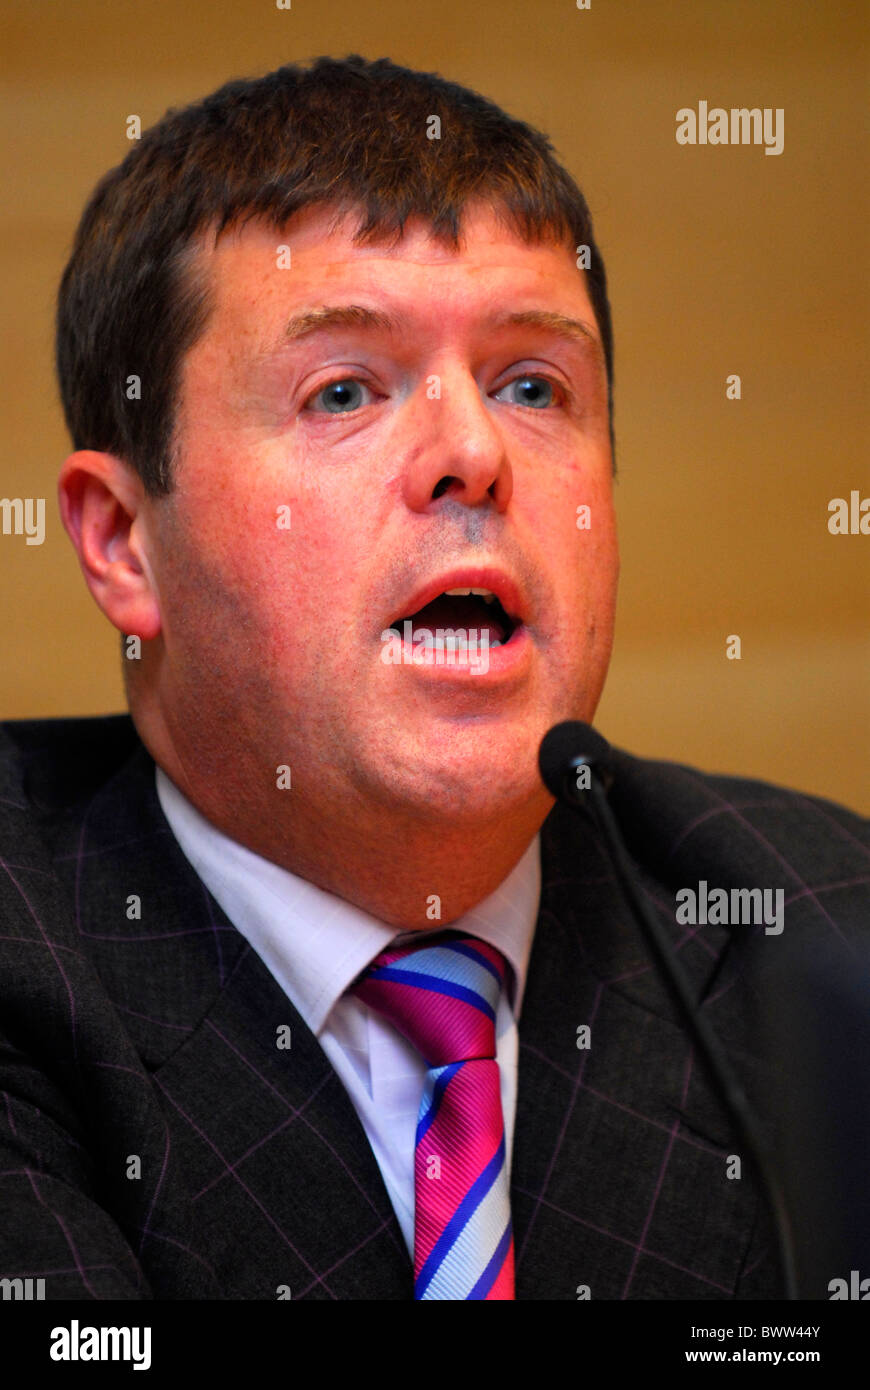 Paul Burstow MP, Minister of State, Department of Health, speaking at a carers conference, November 2010, London, UK. Stock Photo